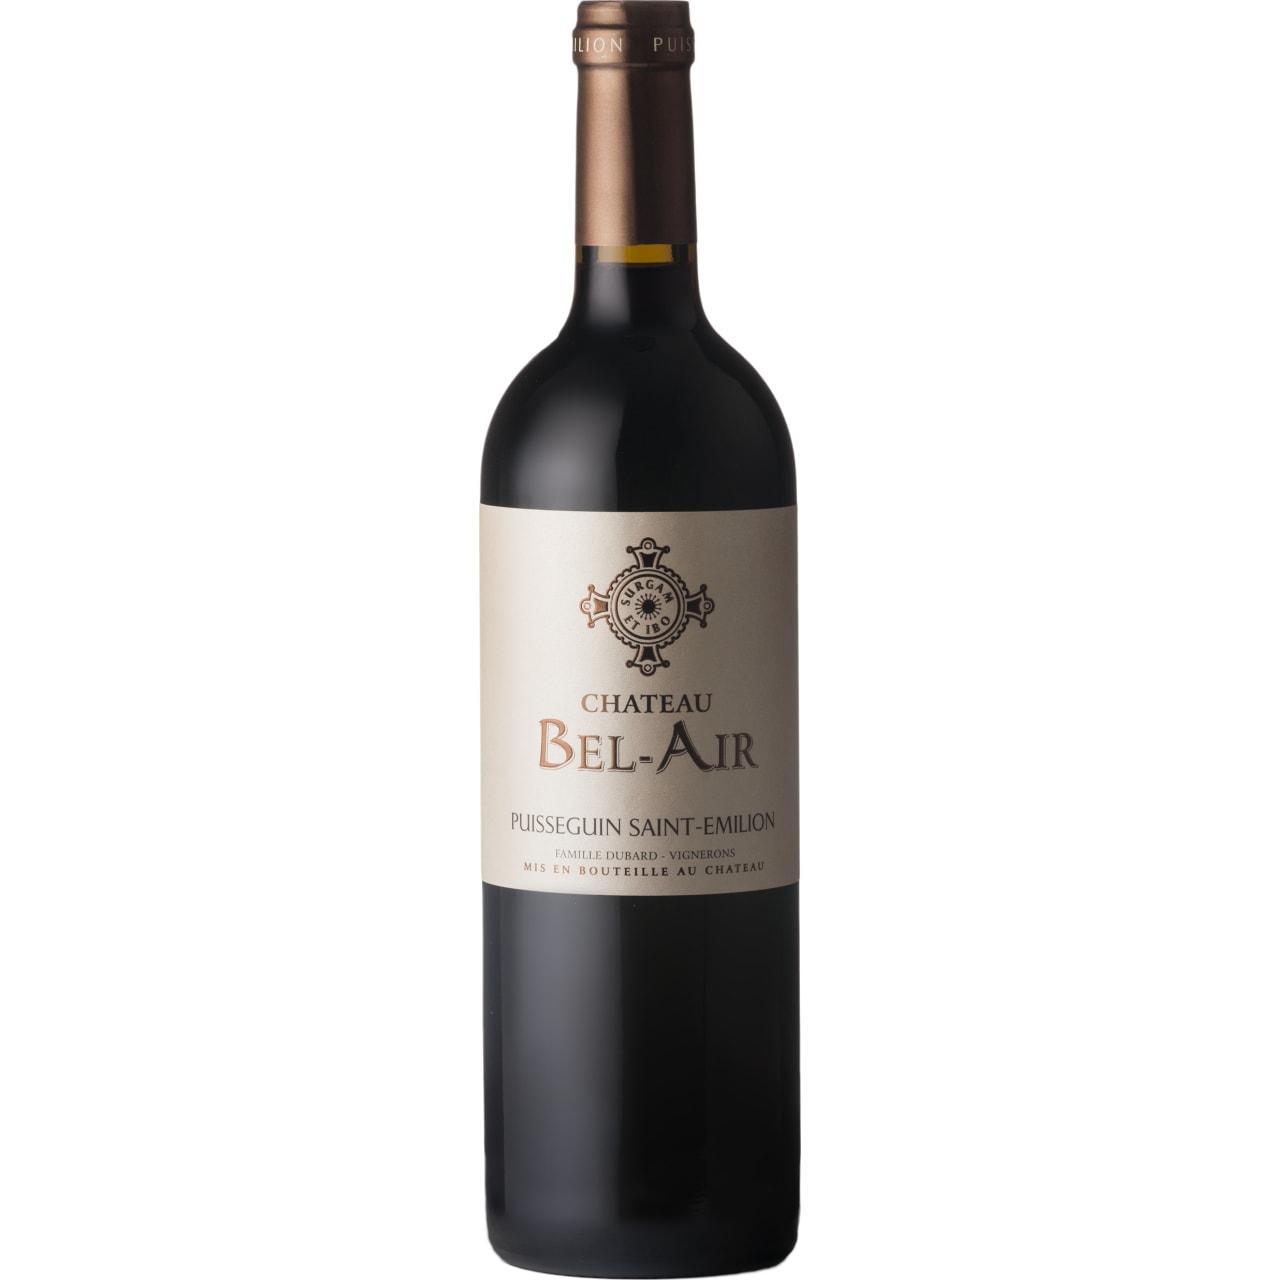 A charming wine, full of ripe plum and blueberry fruit, supported by toasty oak. Ample-textured, with juicy fruit balanced by firm tannins and great structure.